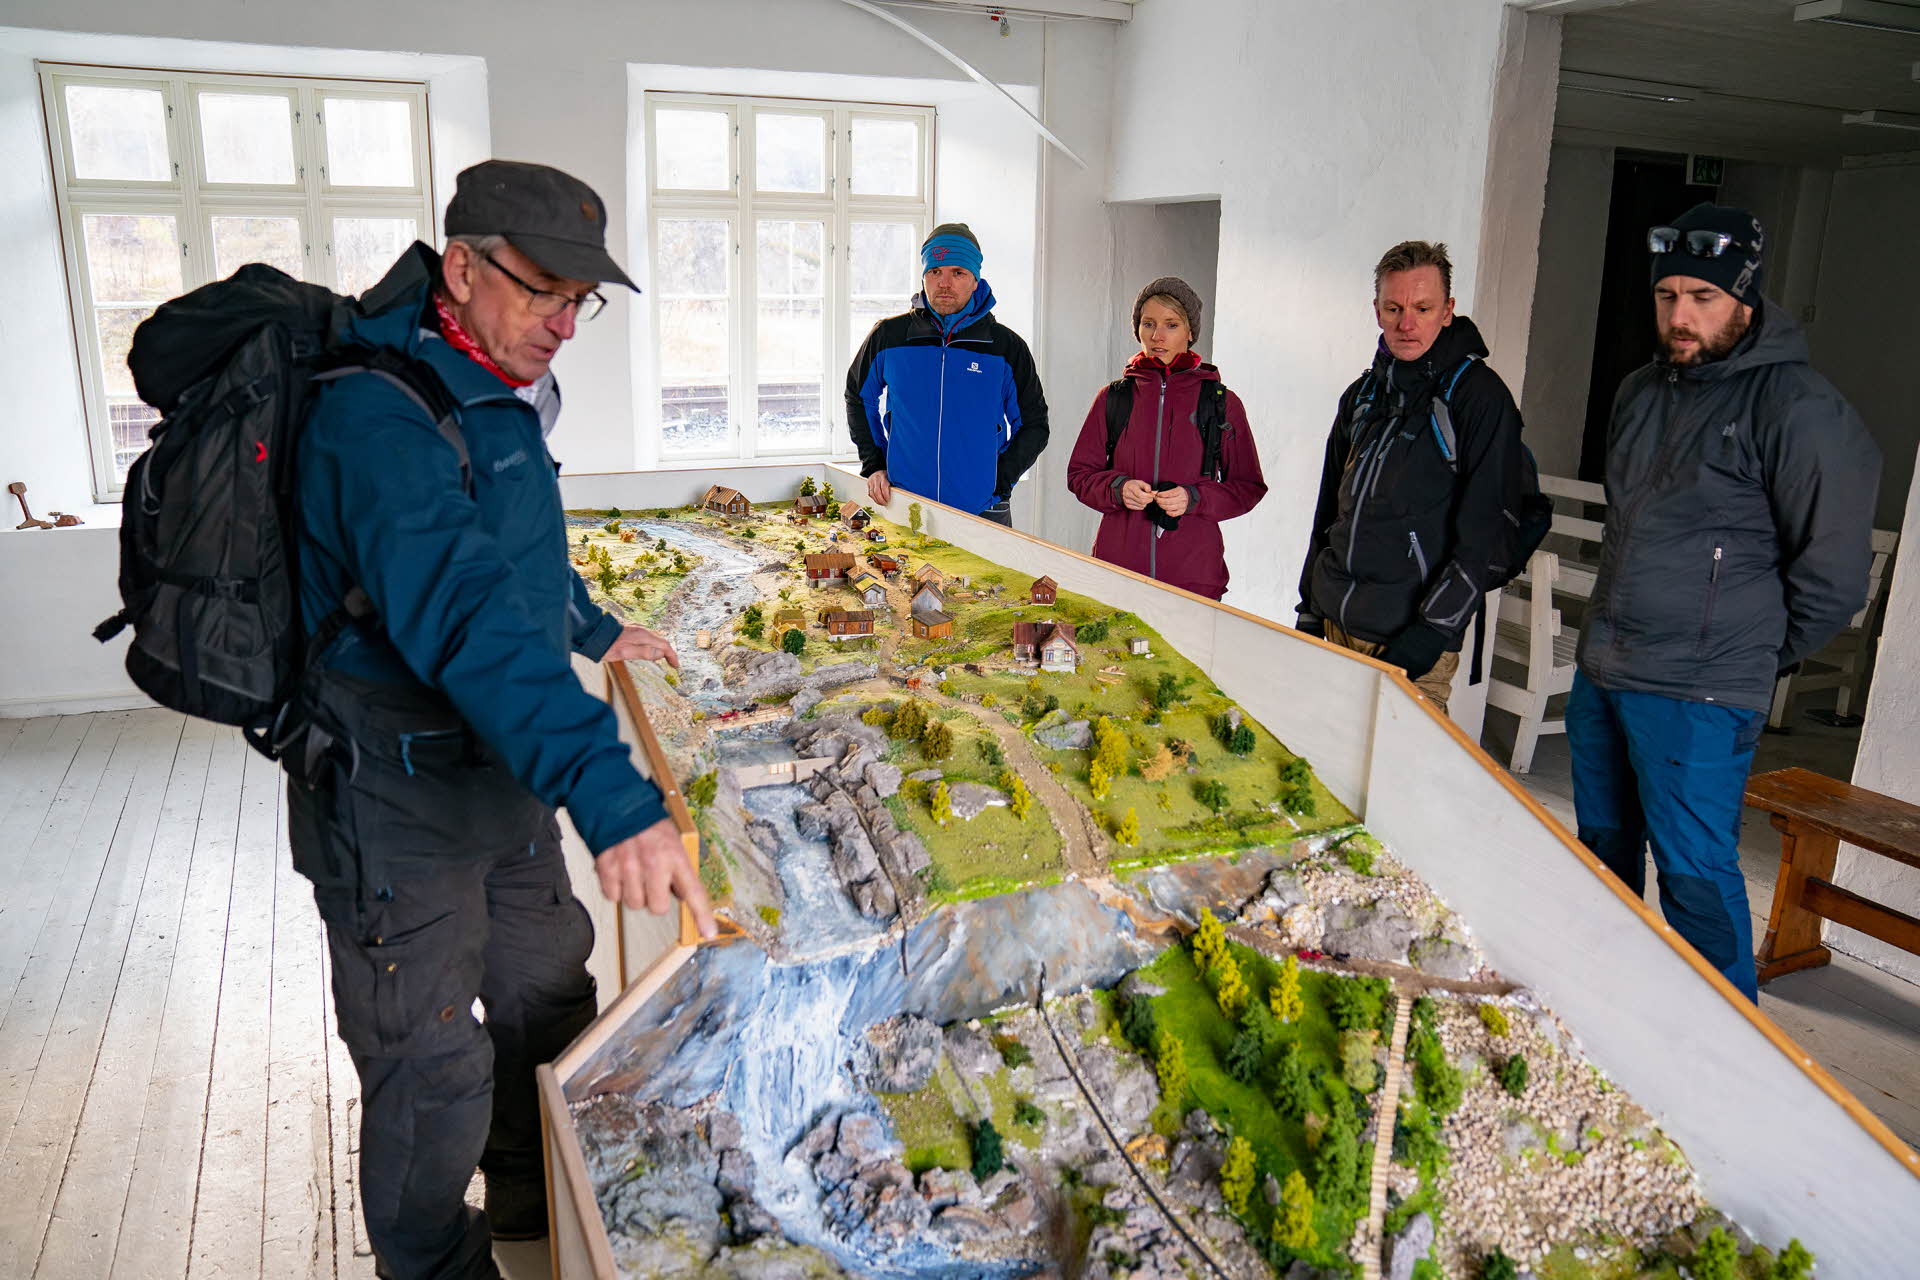 A guide showing a model of the construction site of the Ofot Line to a group of three men and a woman.